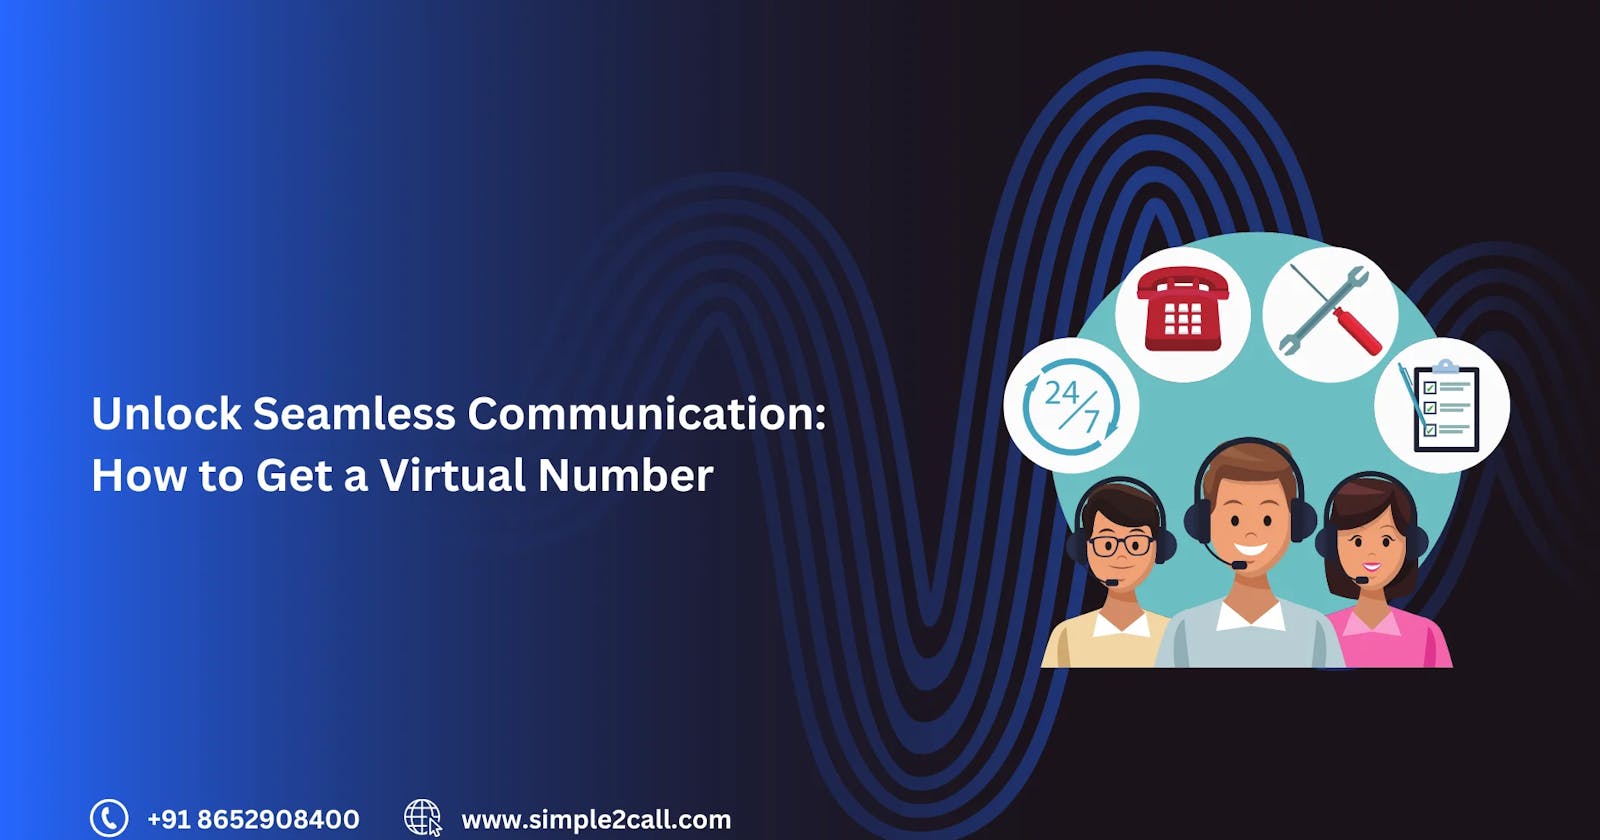 How to Get a Virtual Number